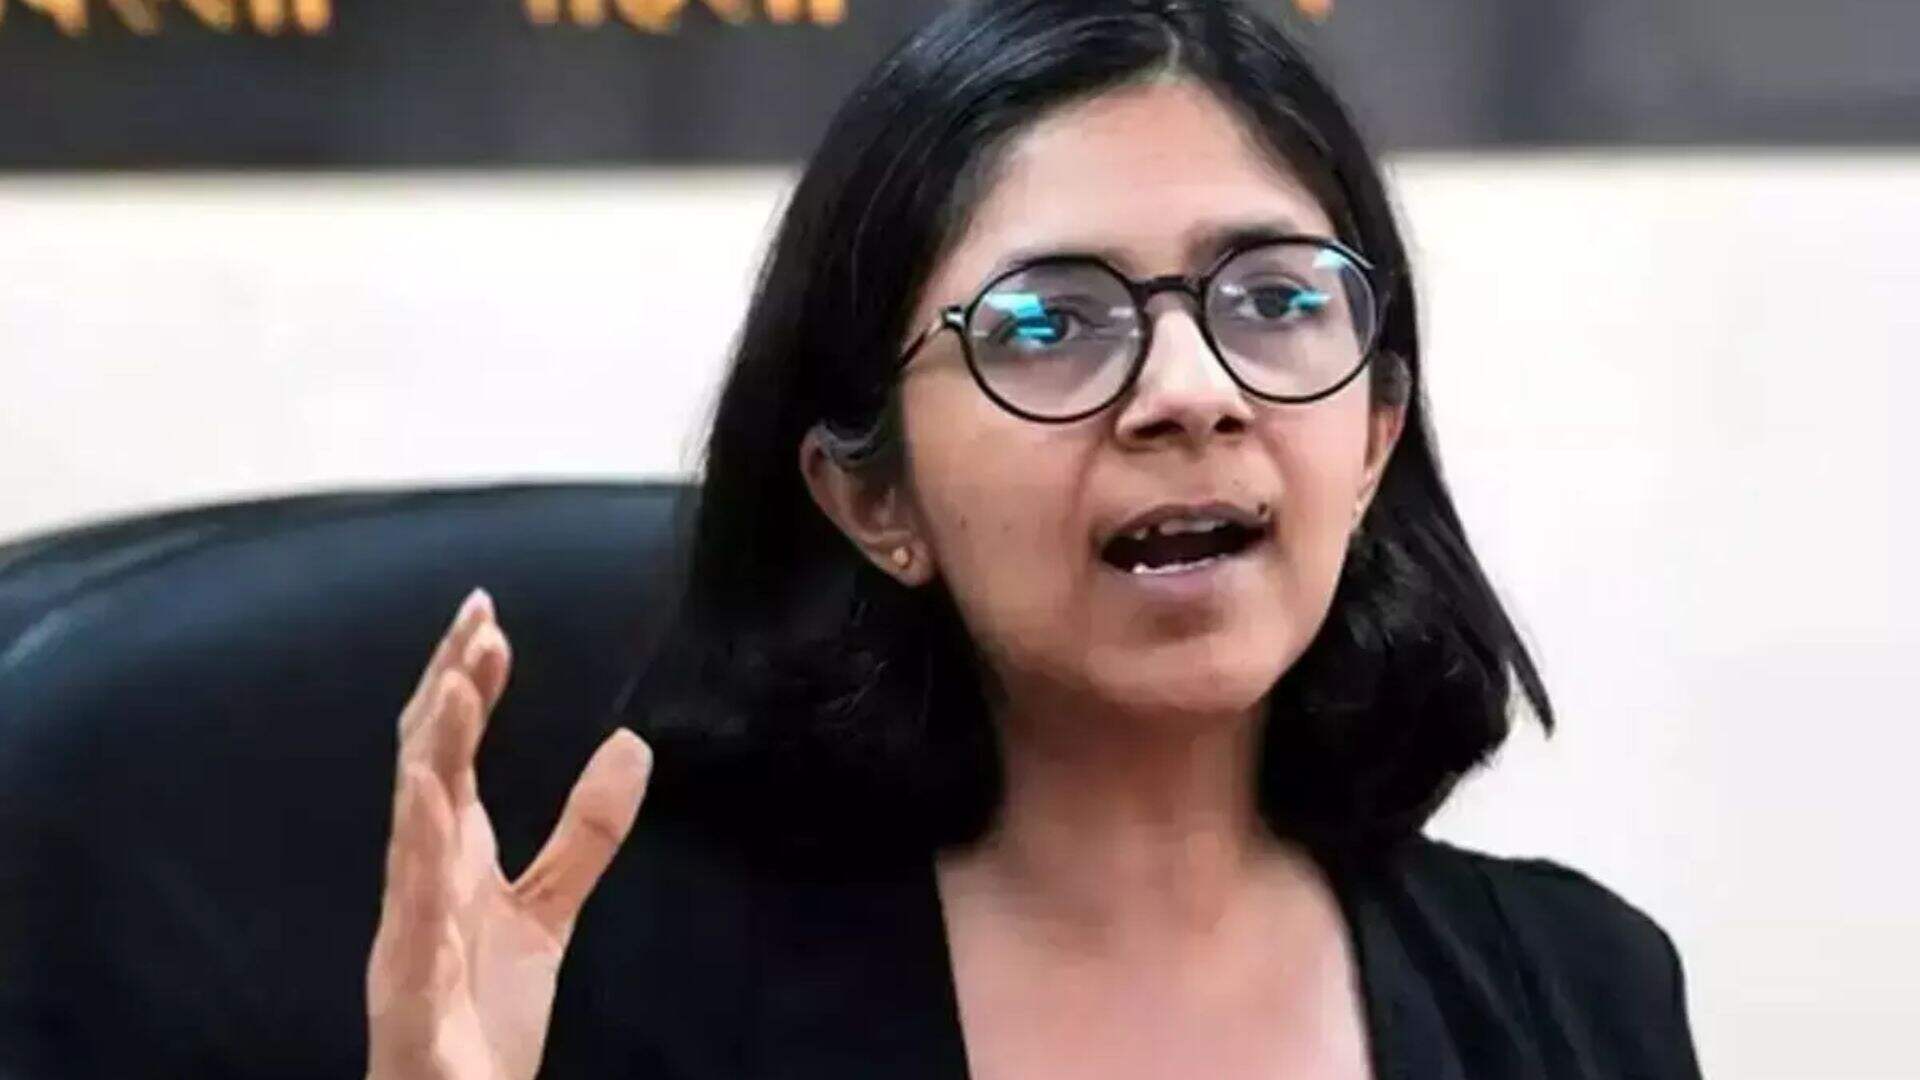 No Complaint Received Yet: Delhi Police Over Alleged Assault Of Swati Maliwal